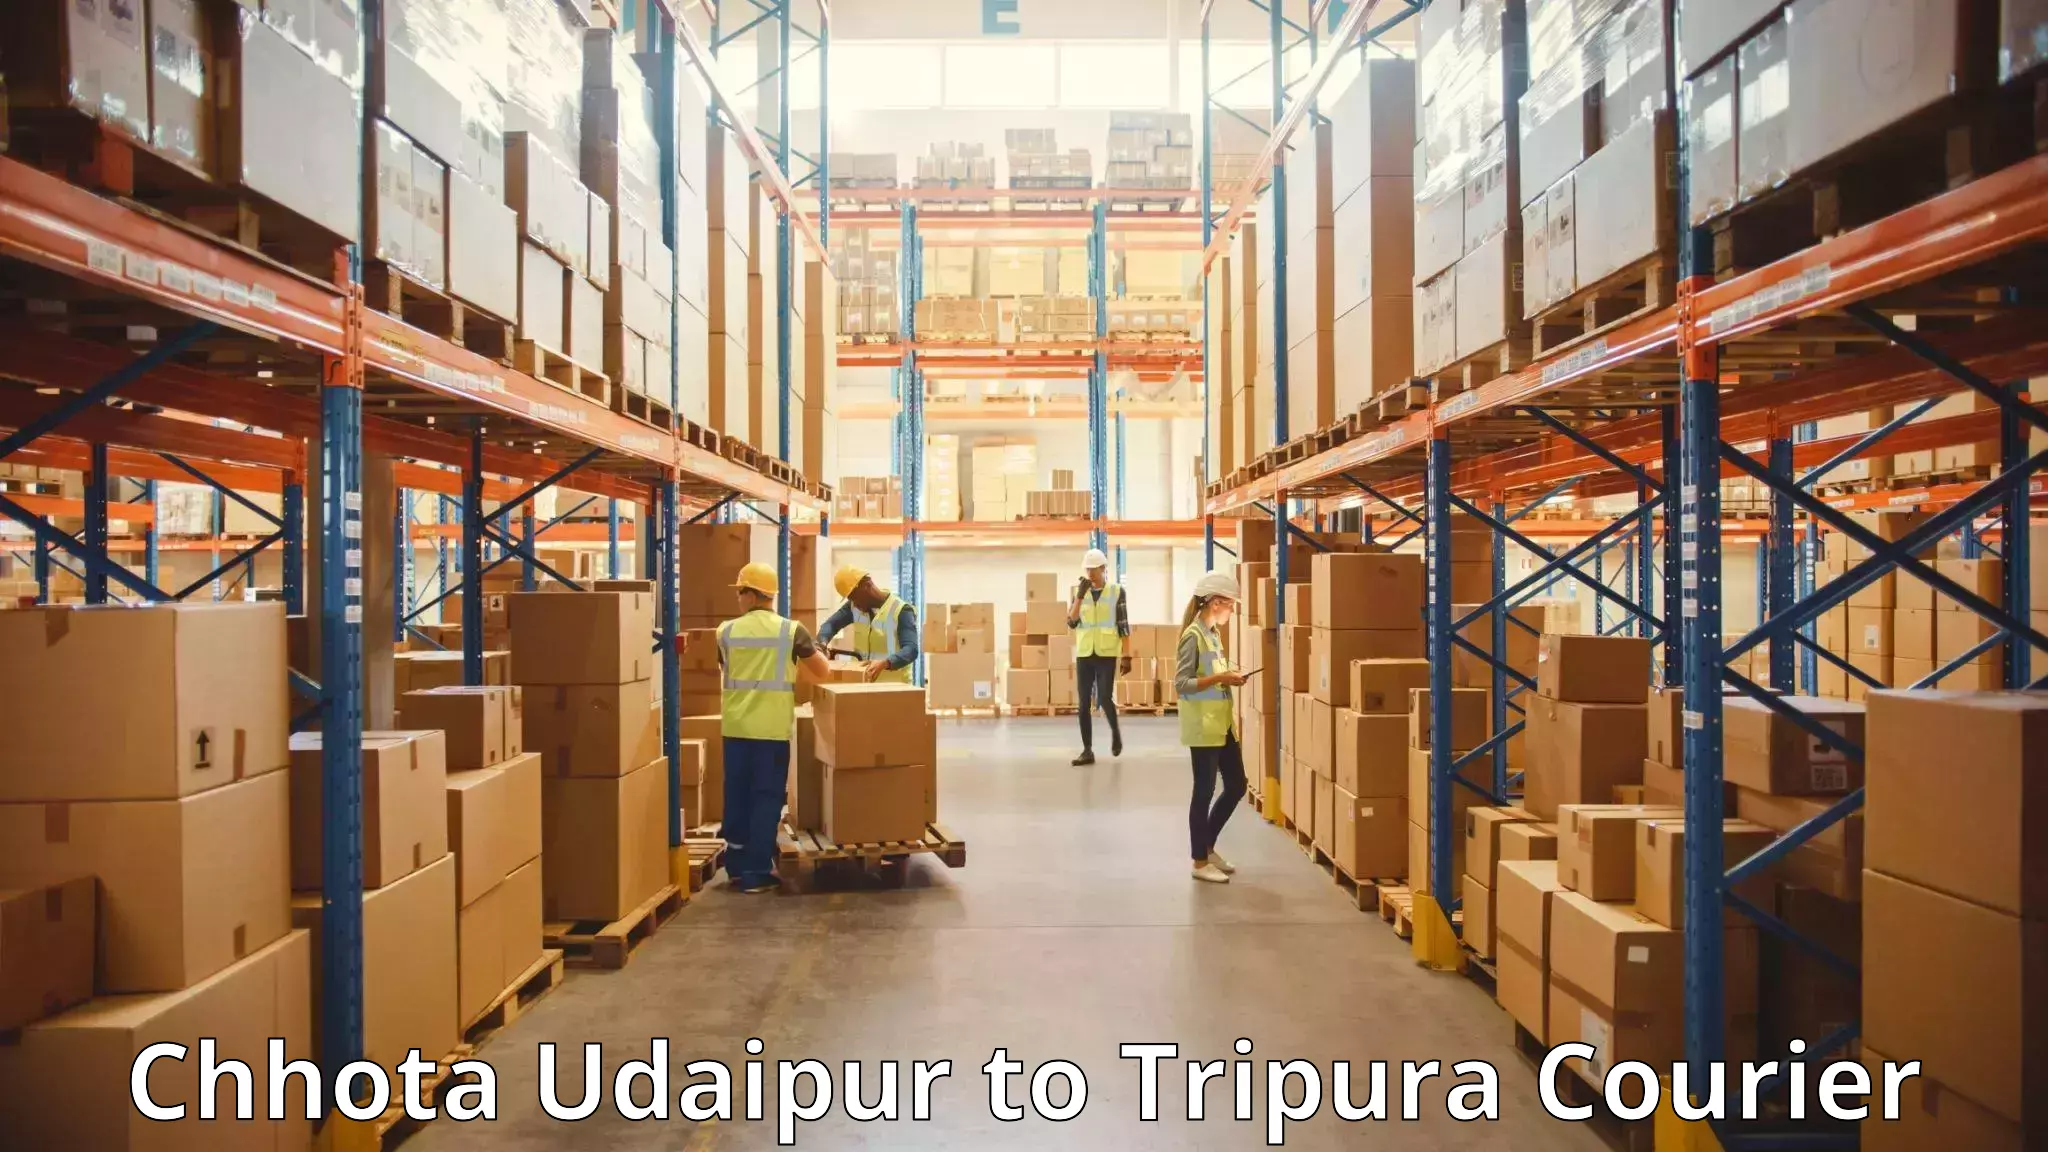 Efficient luggage delivery Chhota Udaipur to Udaipur Tripura